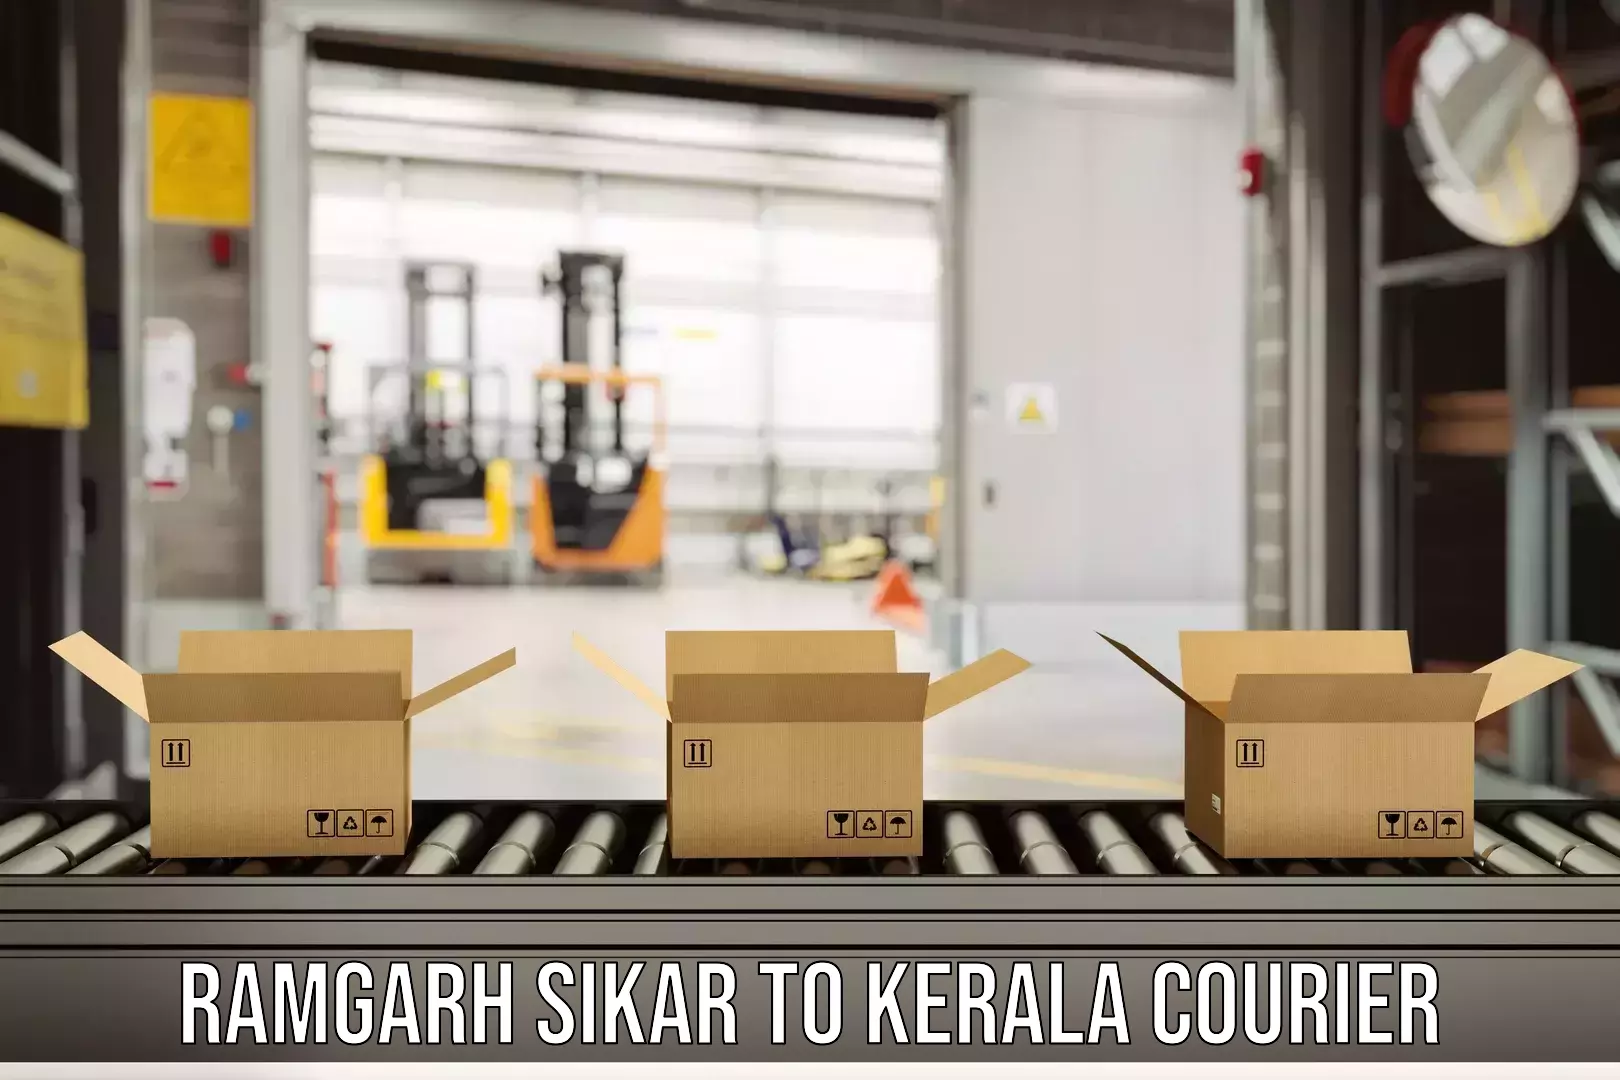 Fastest parcel delivery Ramgarh Sikar to Kerala